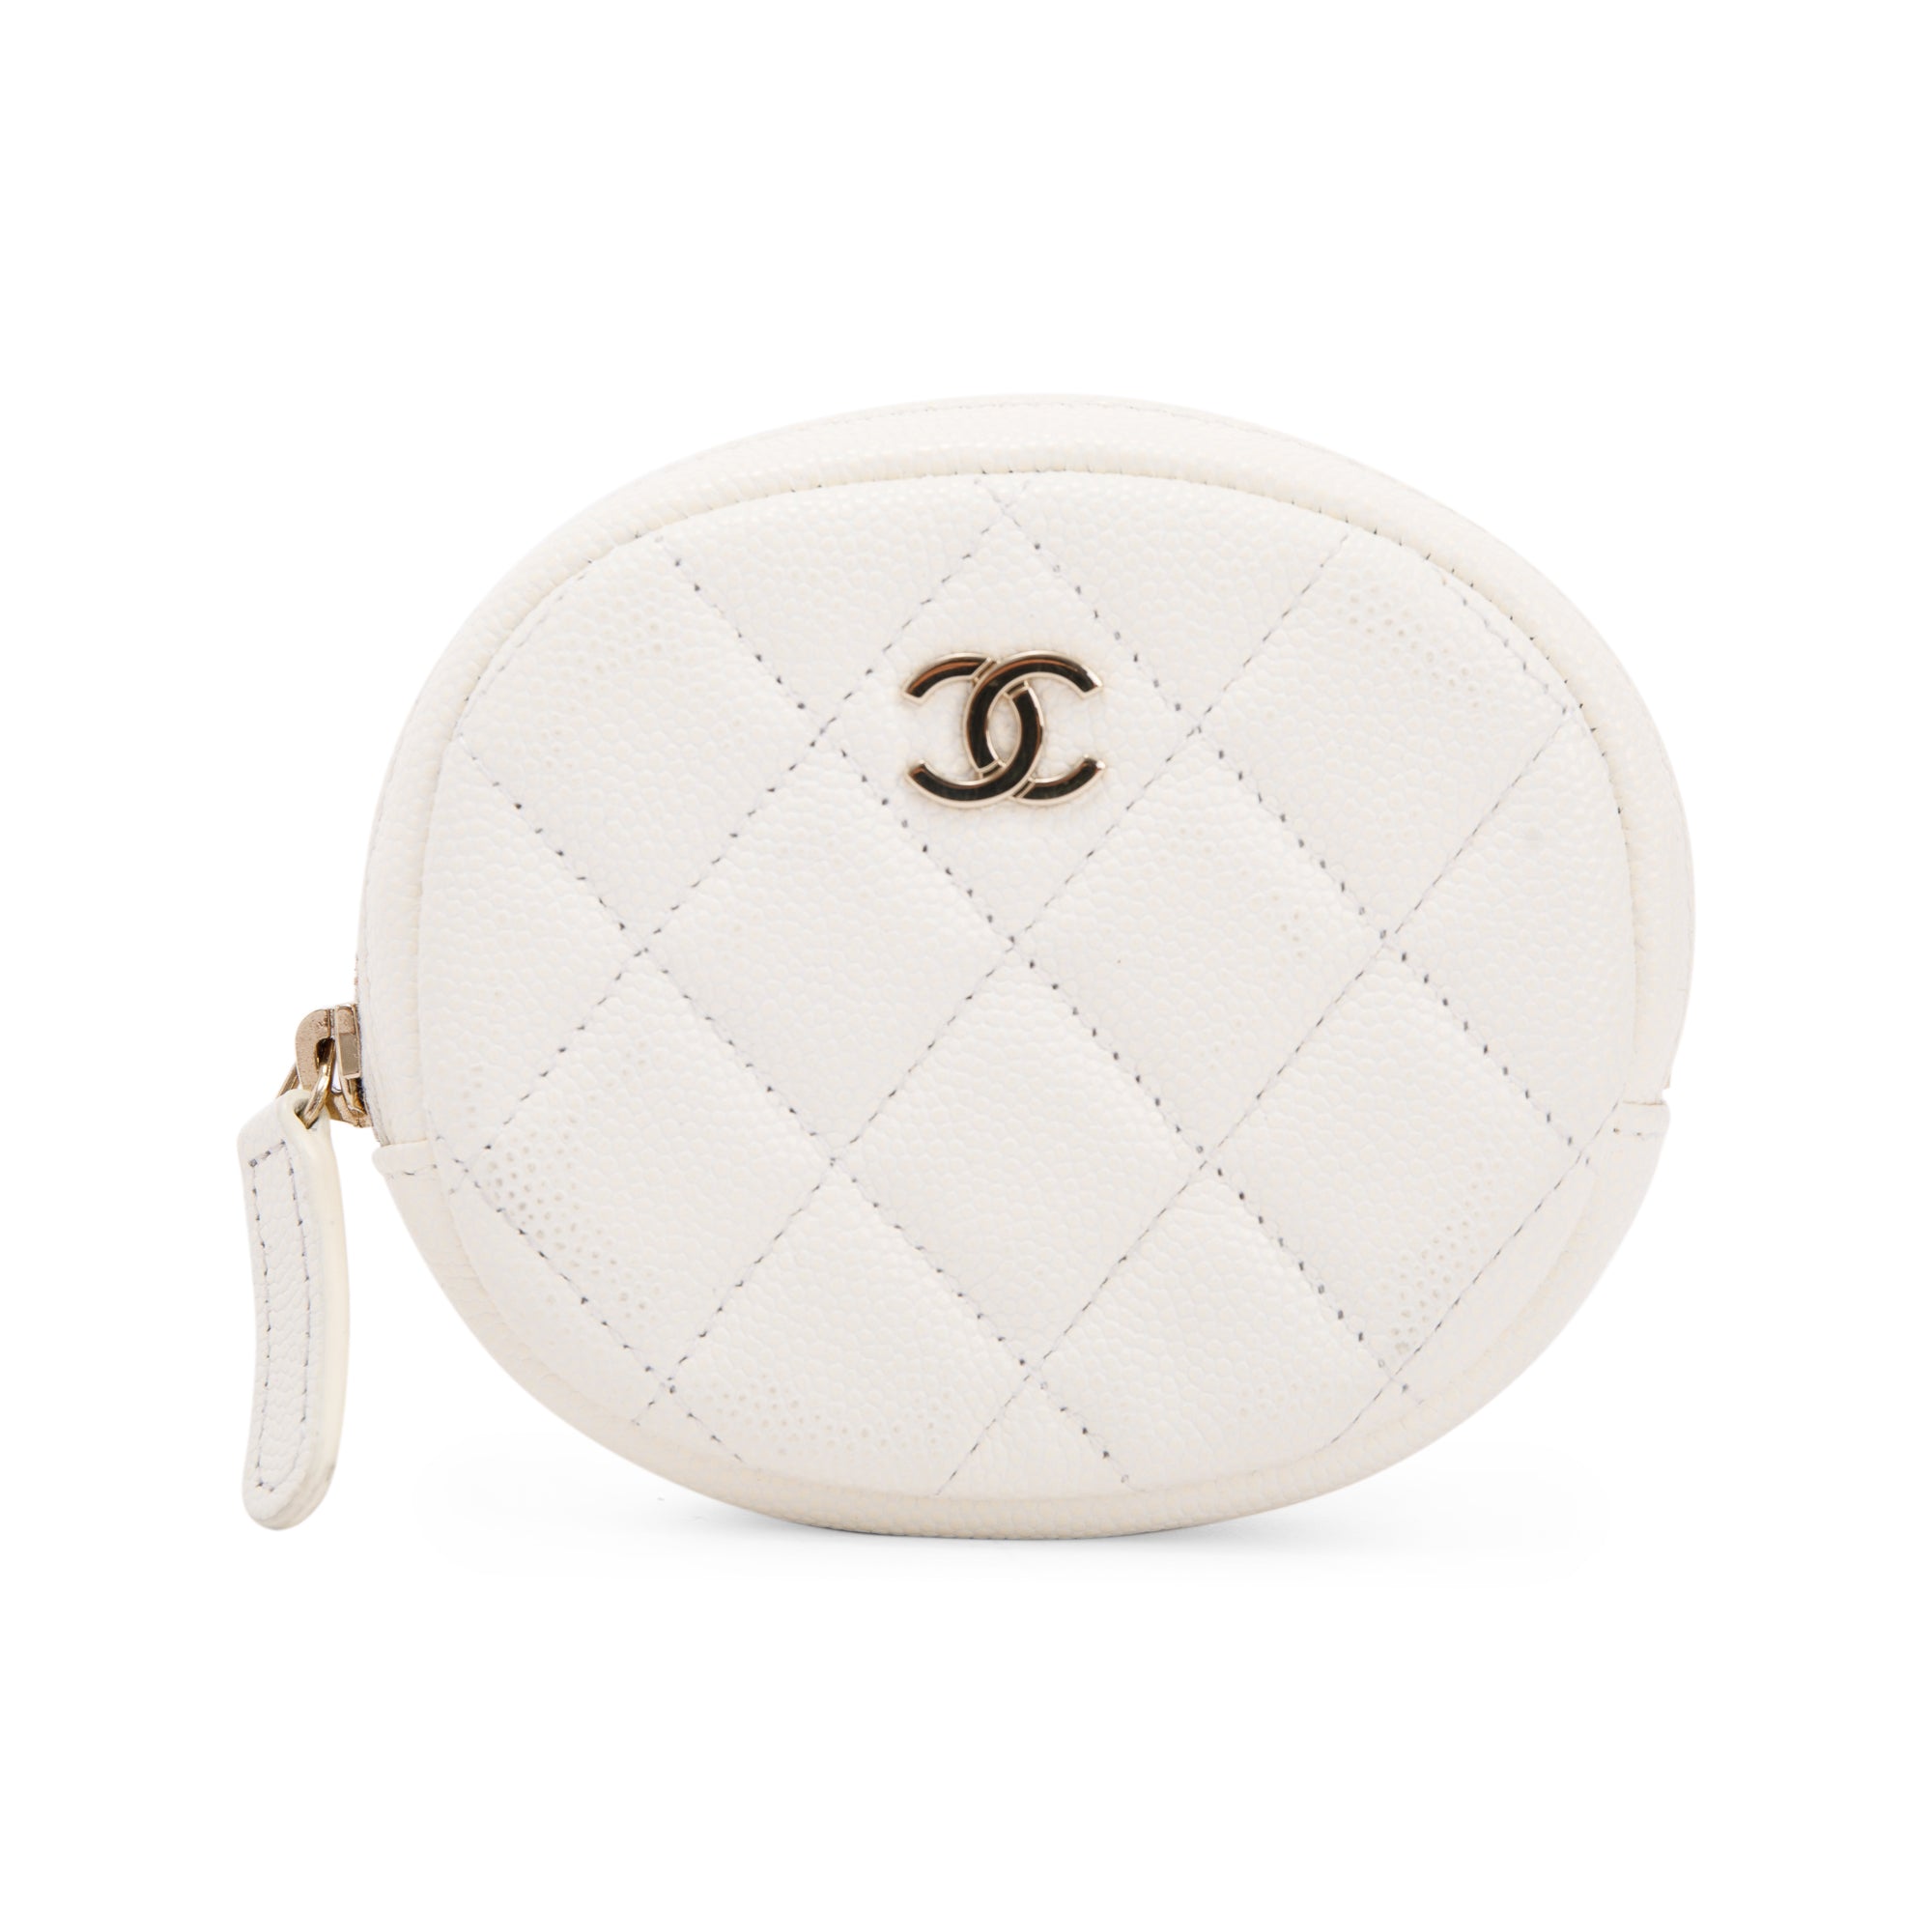 At Auction: A Chanel Zippered Card/Coin Purse w/ Authenticity